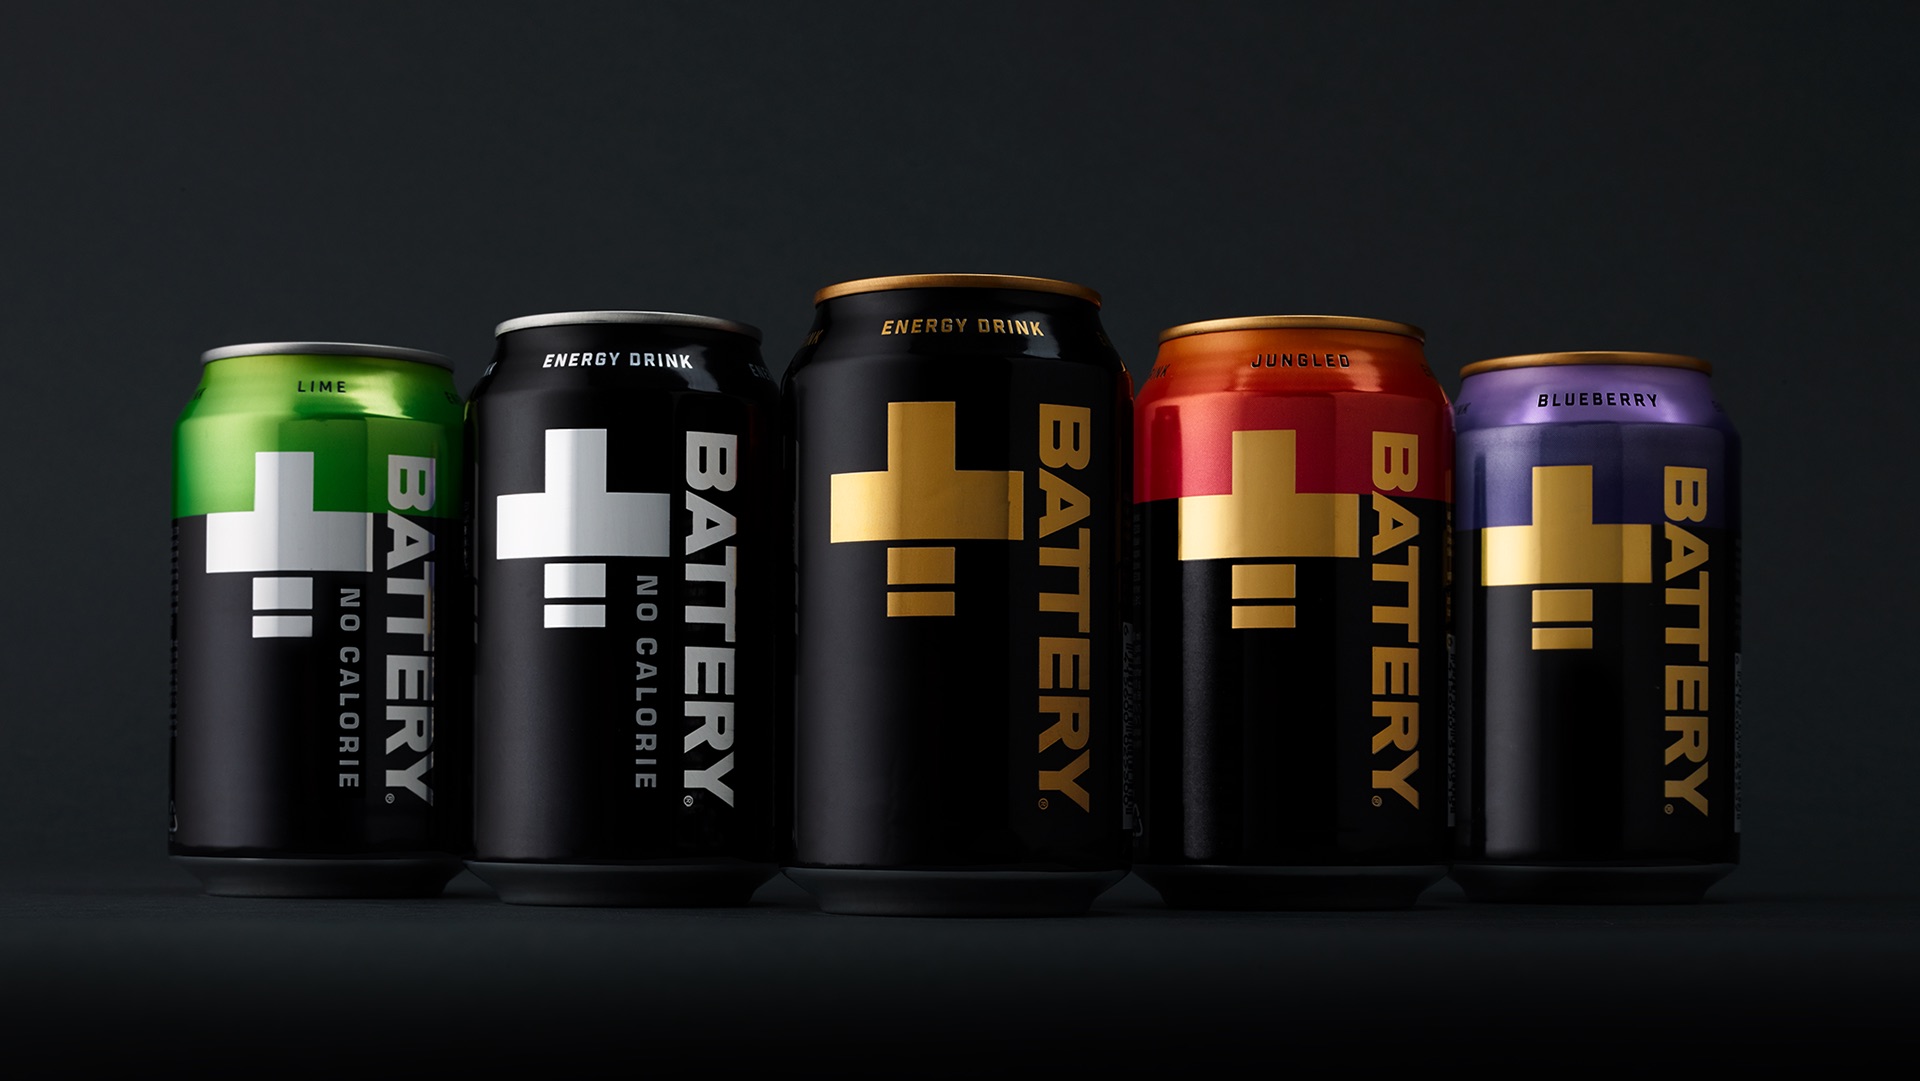 Battery Energy Drink Rebrands with a Positively Striking New Identity by Bluemarlin